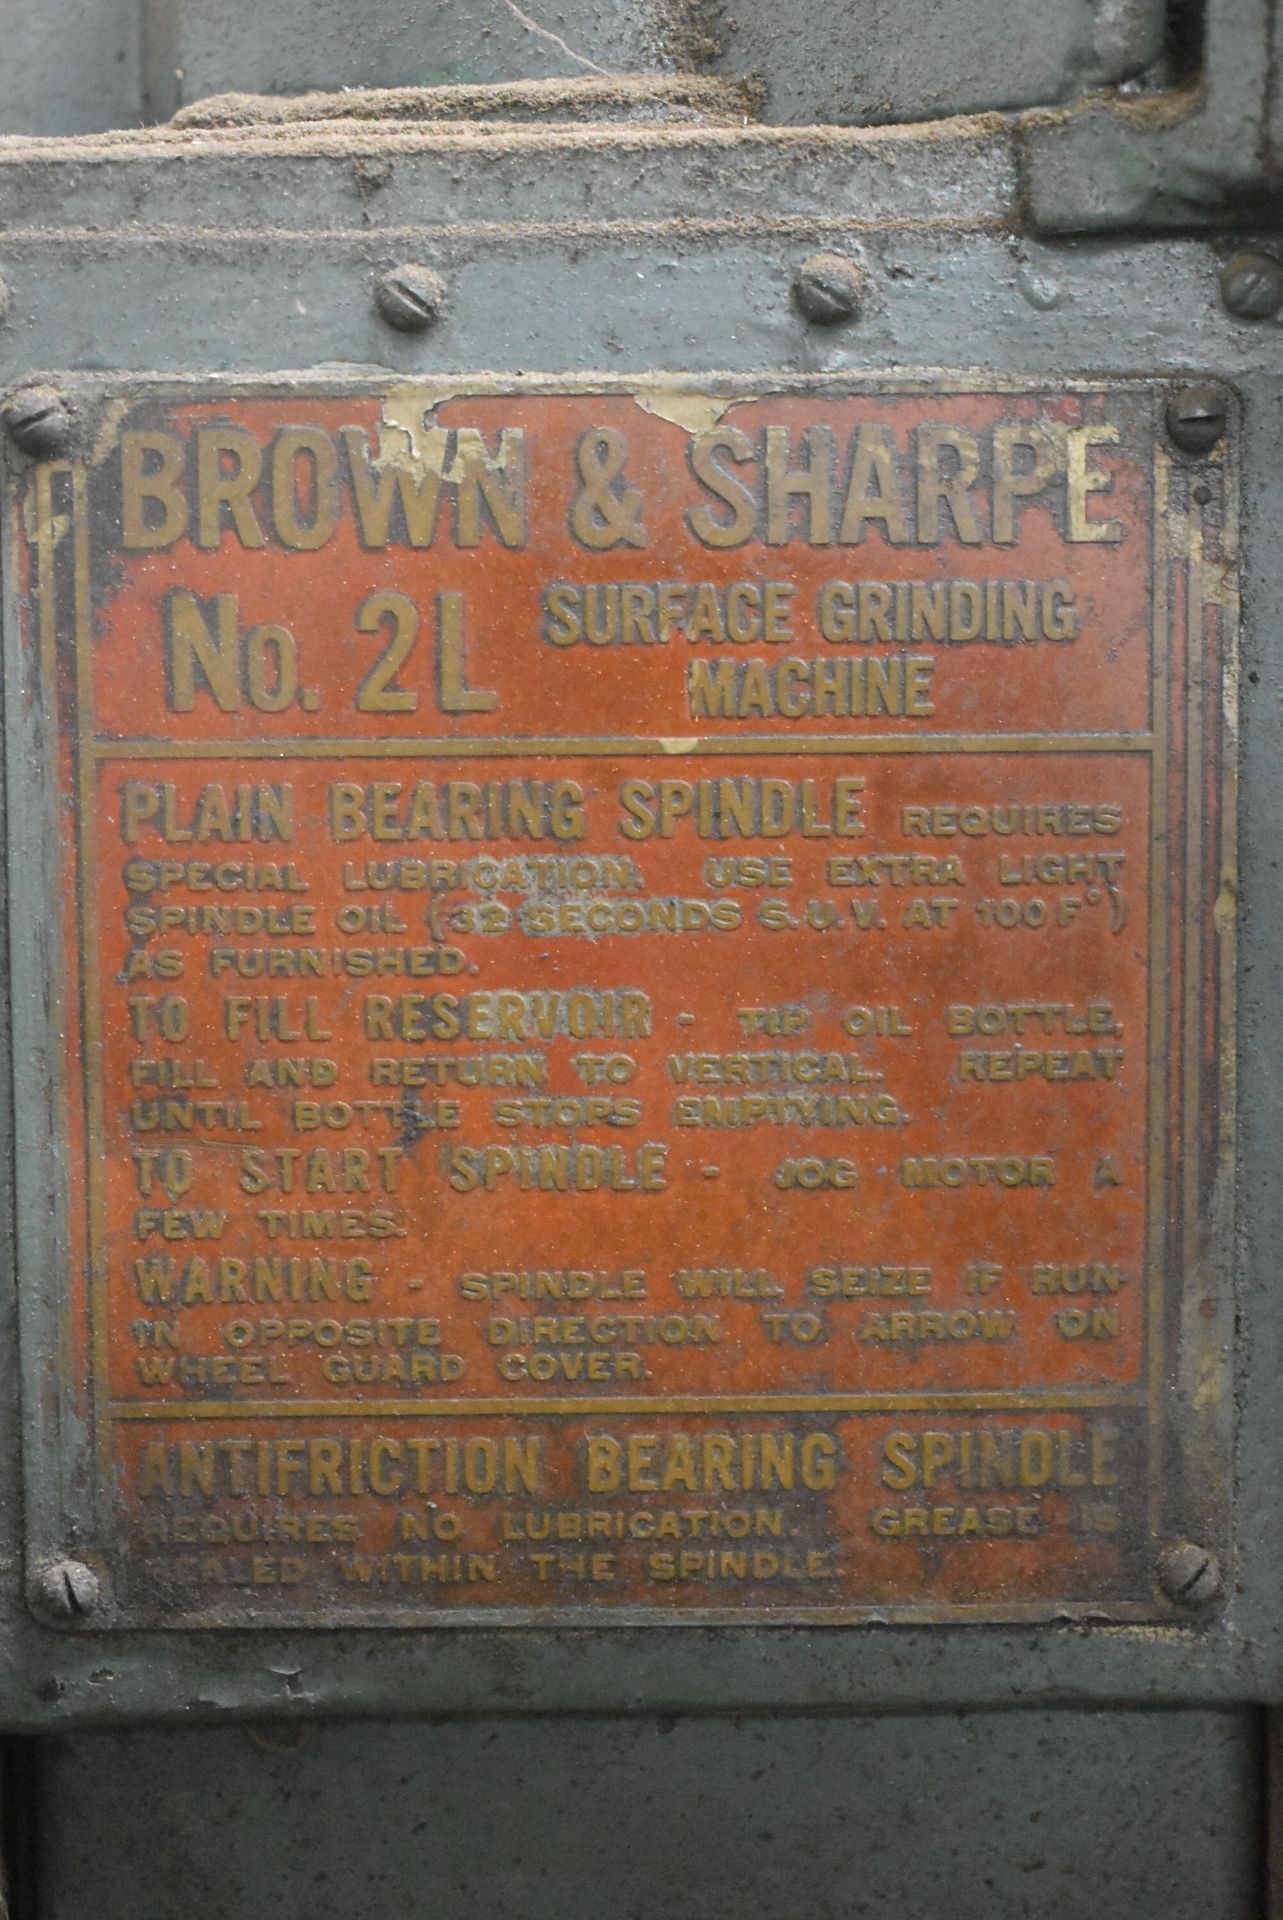 BROWN & SHARPE NO. 2L CONVENTIONAL SURFACE GRINDER WITH 6"X18" ELECTROMAGNETIC CHUCK, 6" WHEEL, - Image 4 of 4